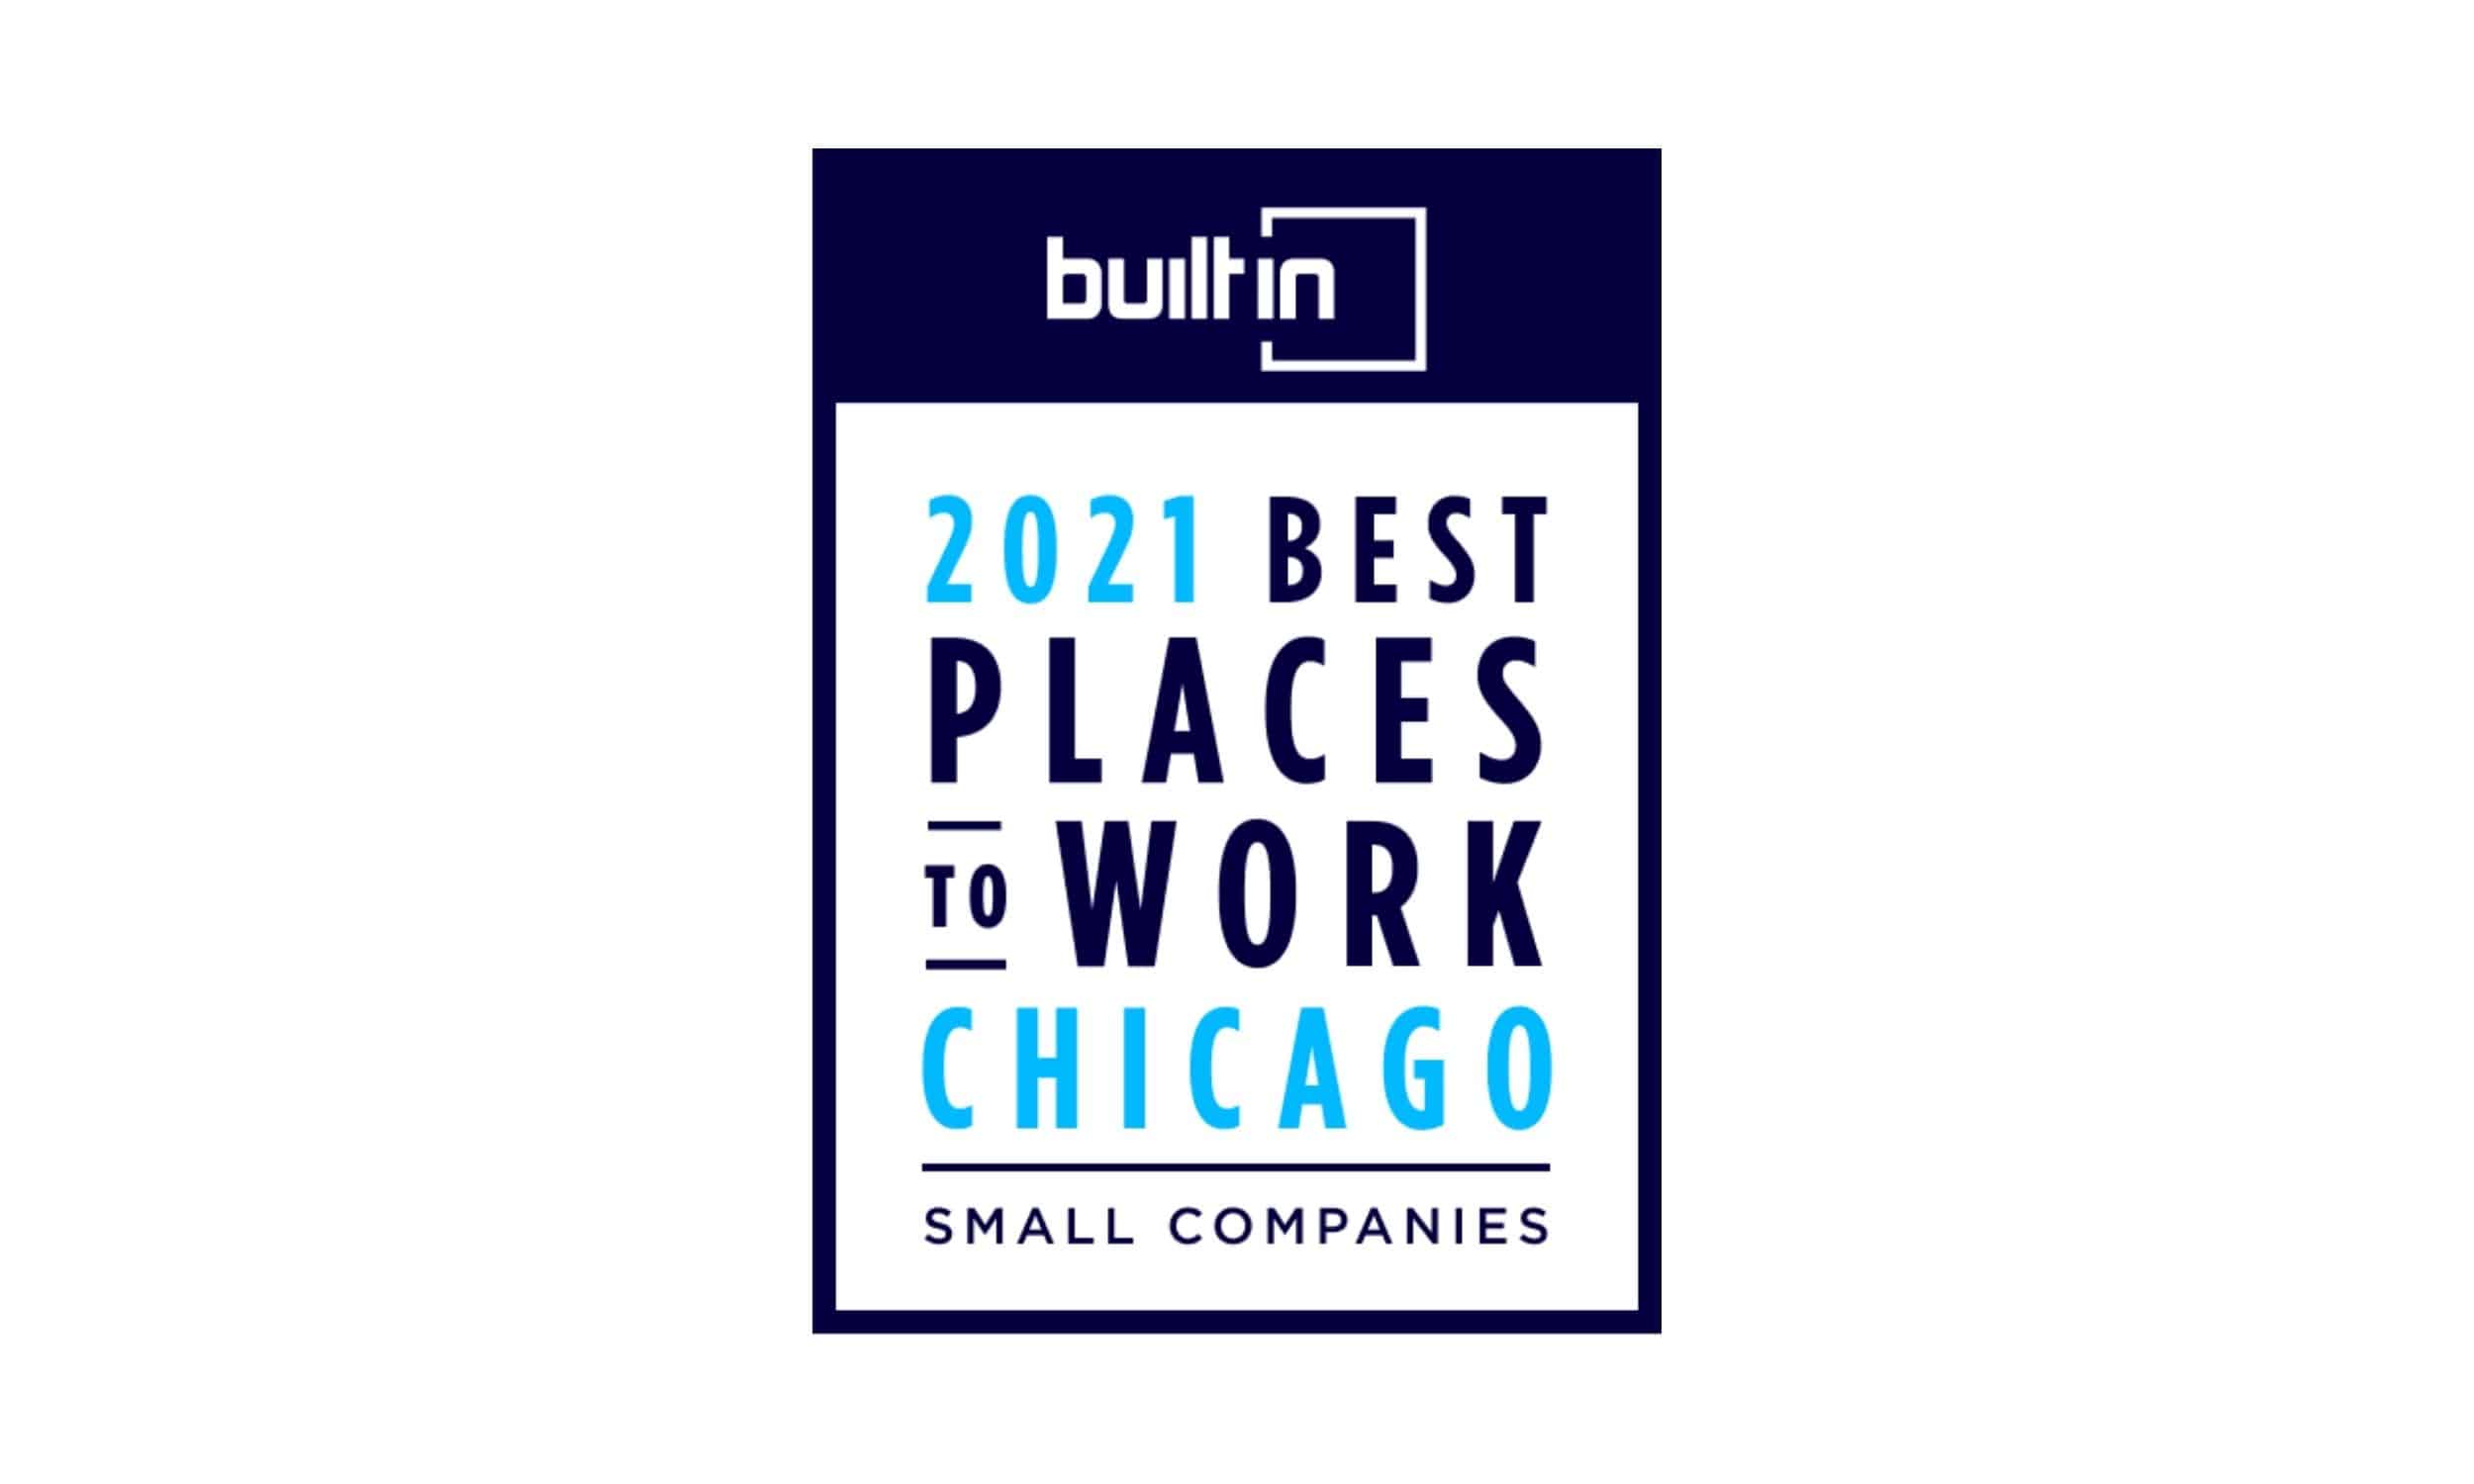 an image of the best places to work award by built in